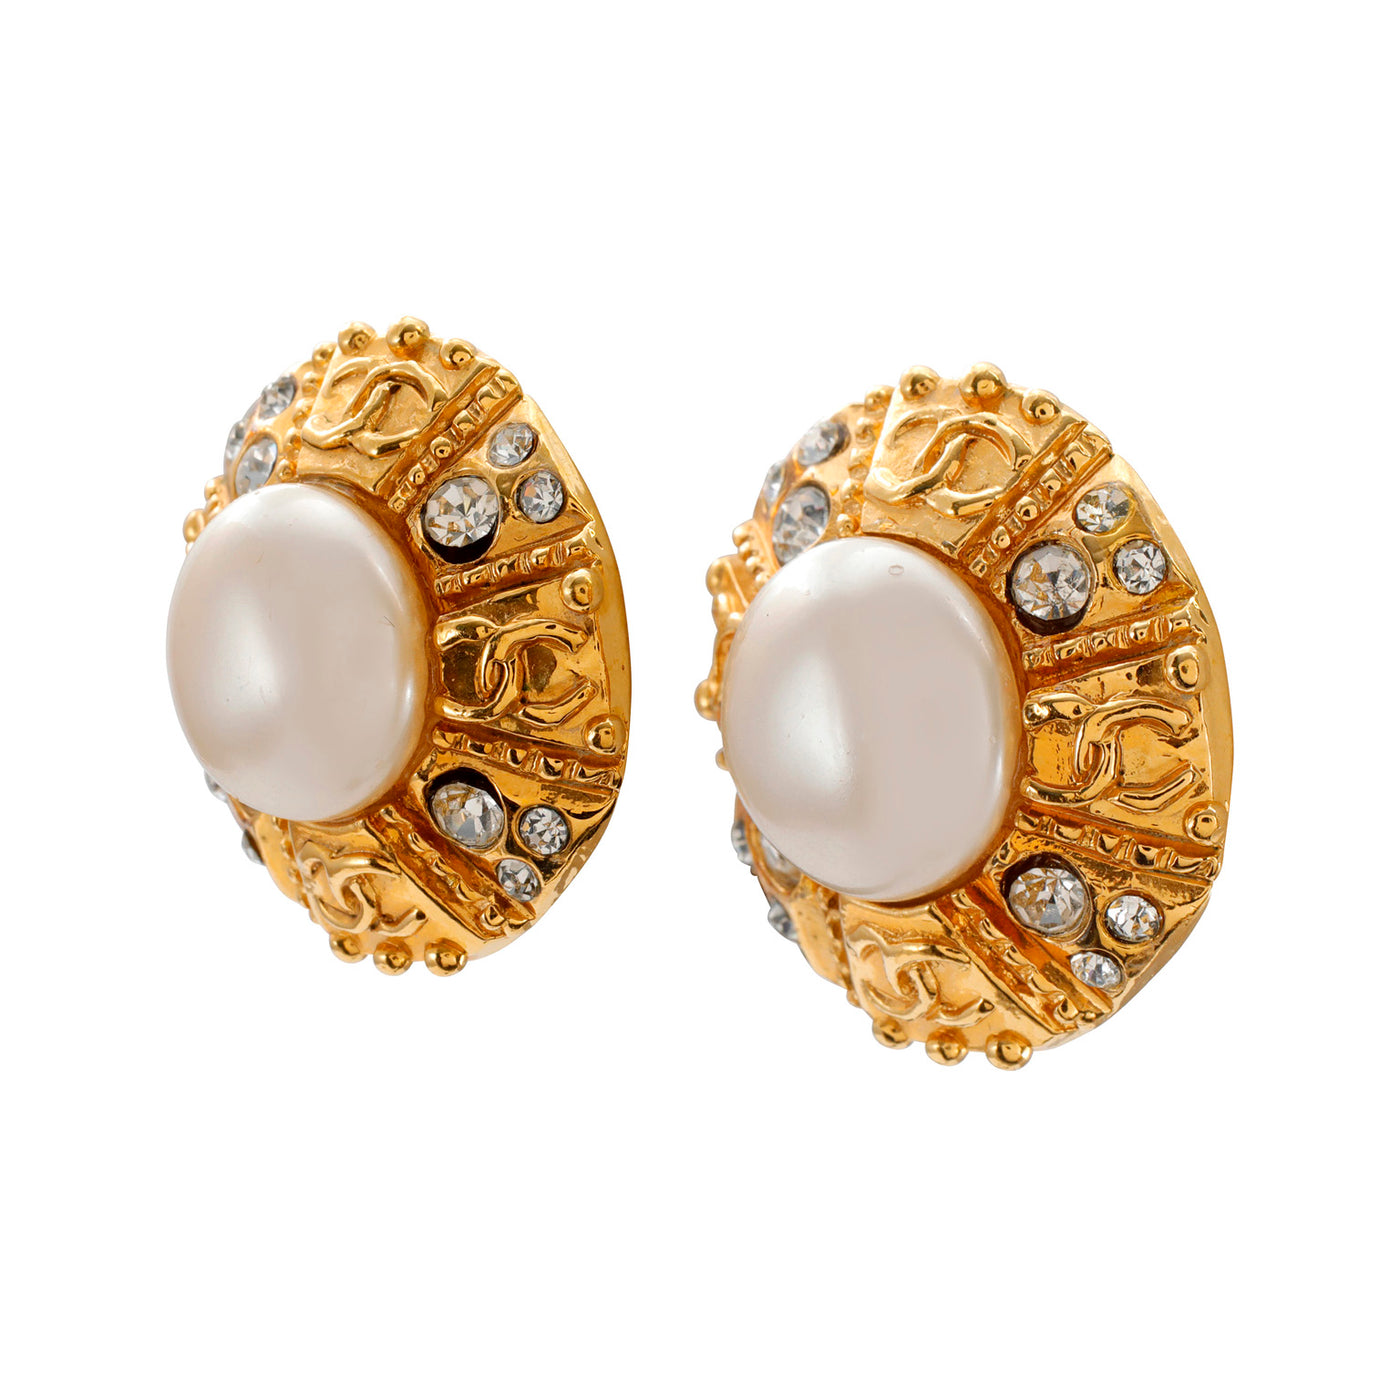 Chanel Large Gold Pearl and Crystal CC Earrings